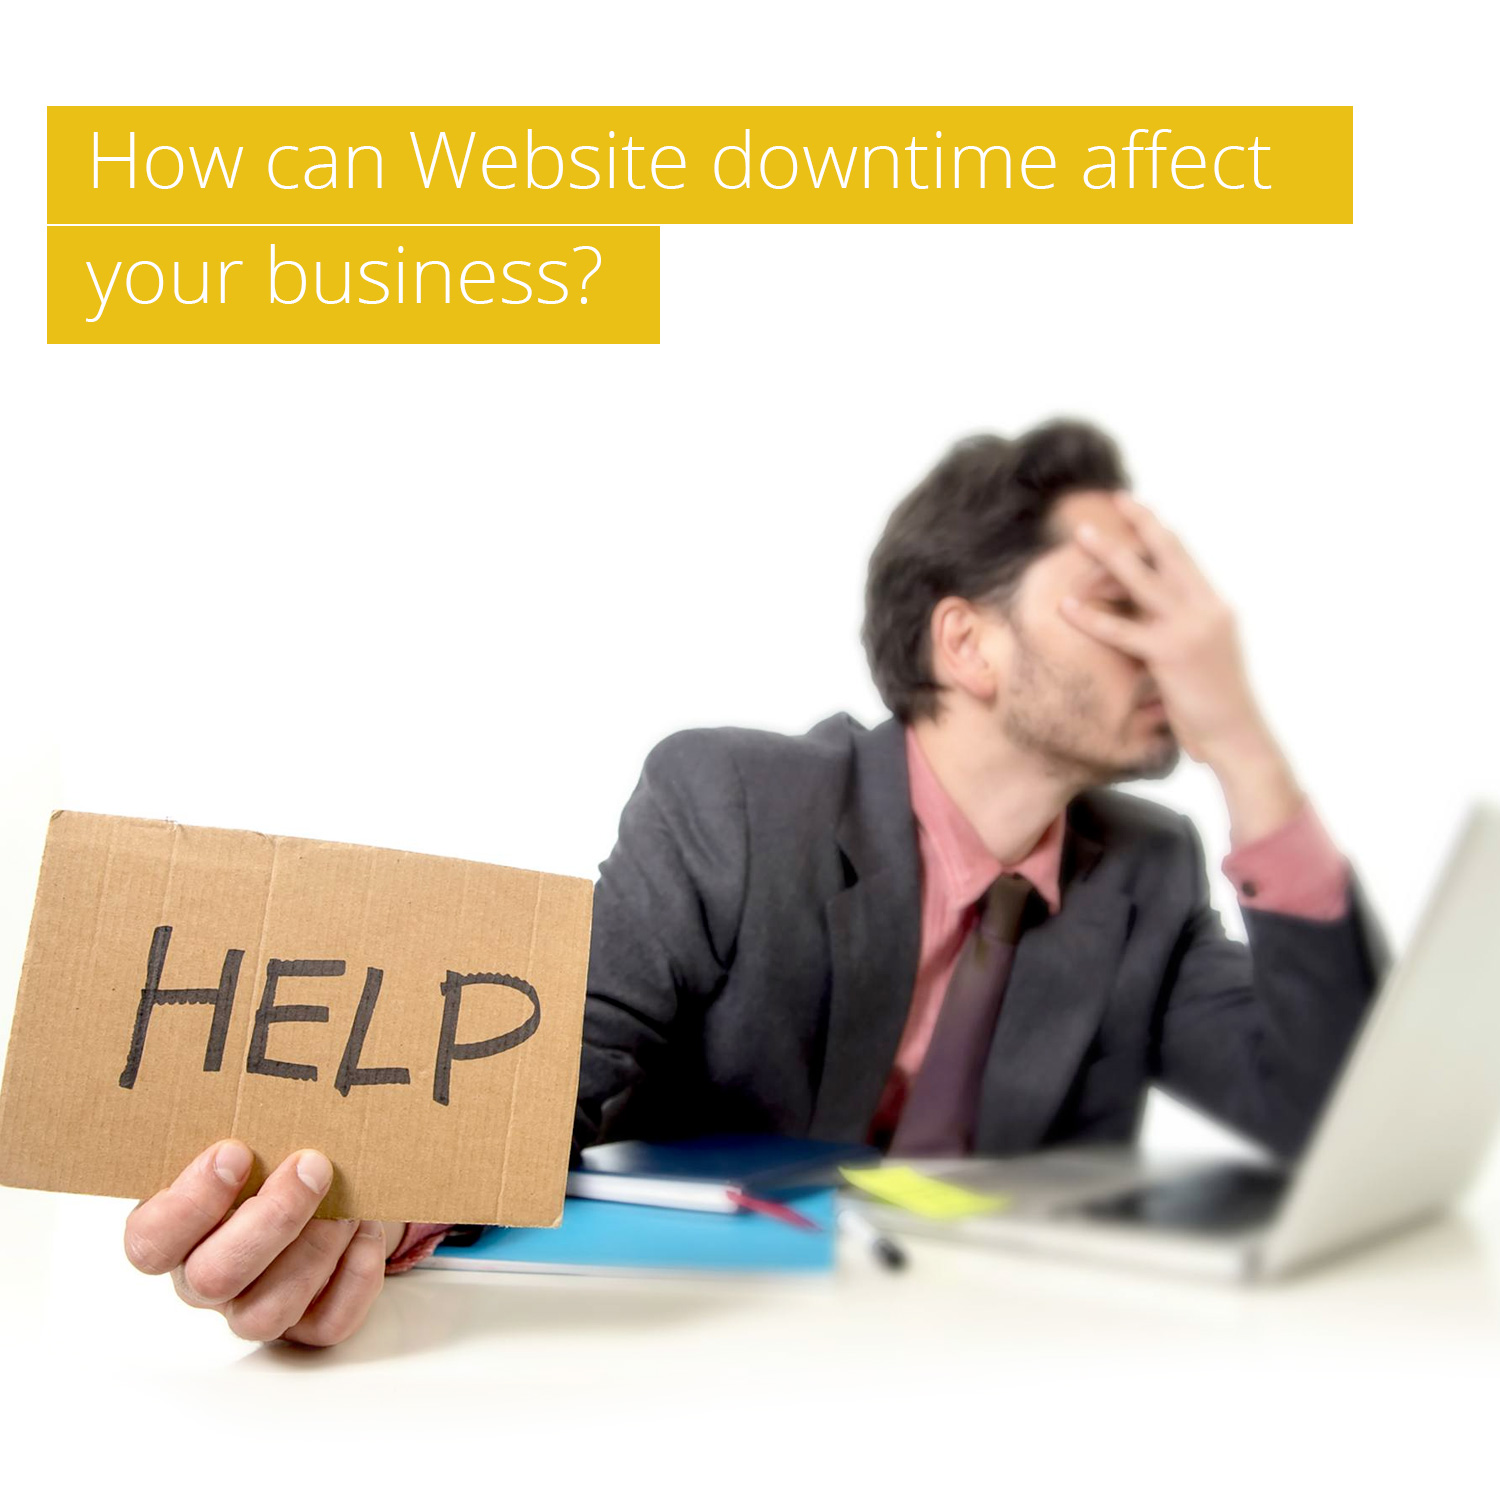 How can Website downtime affect your business?